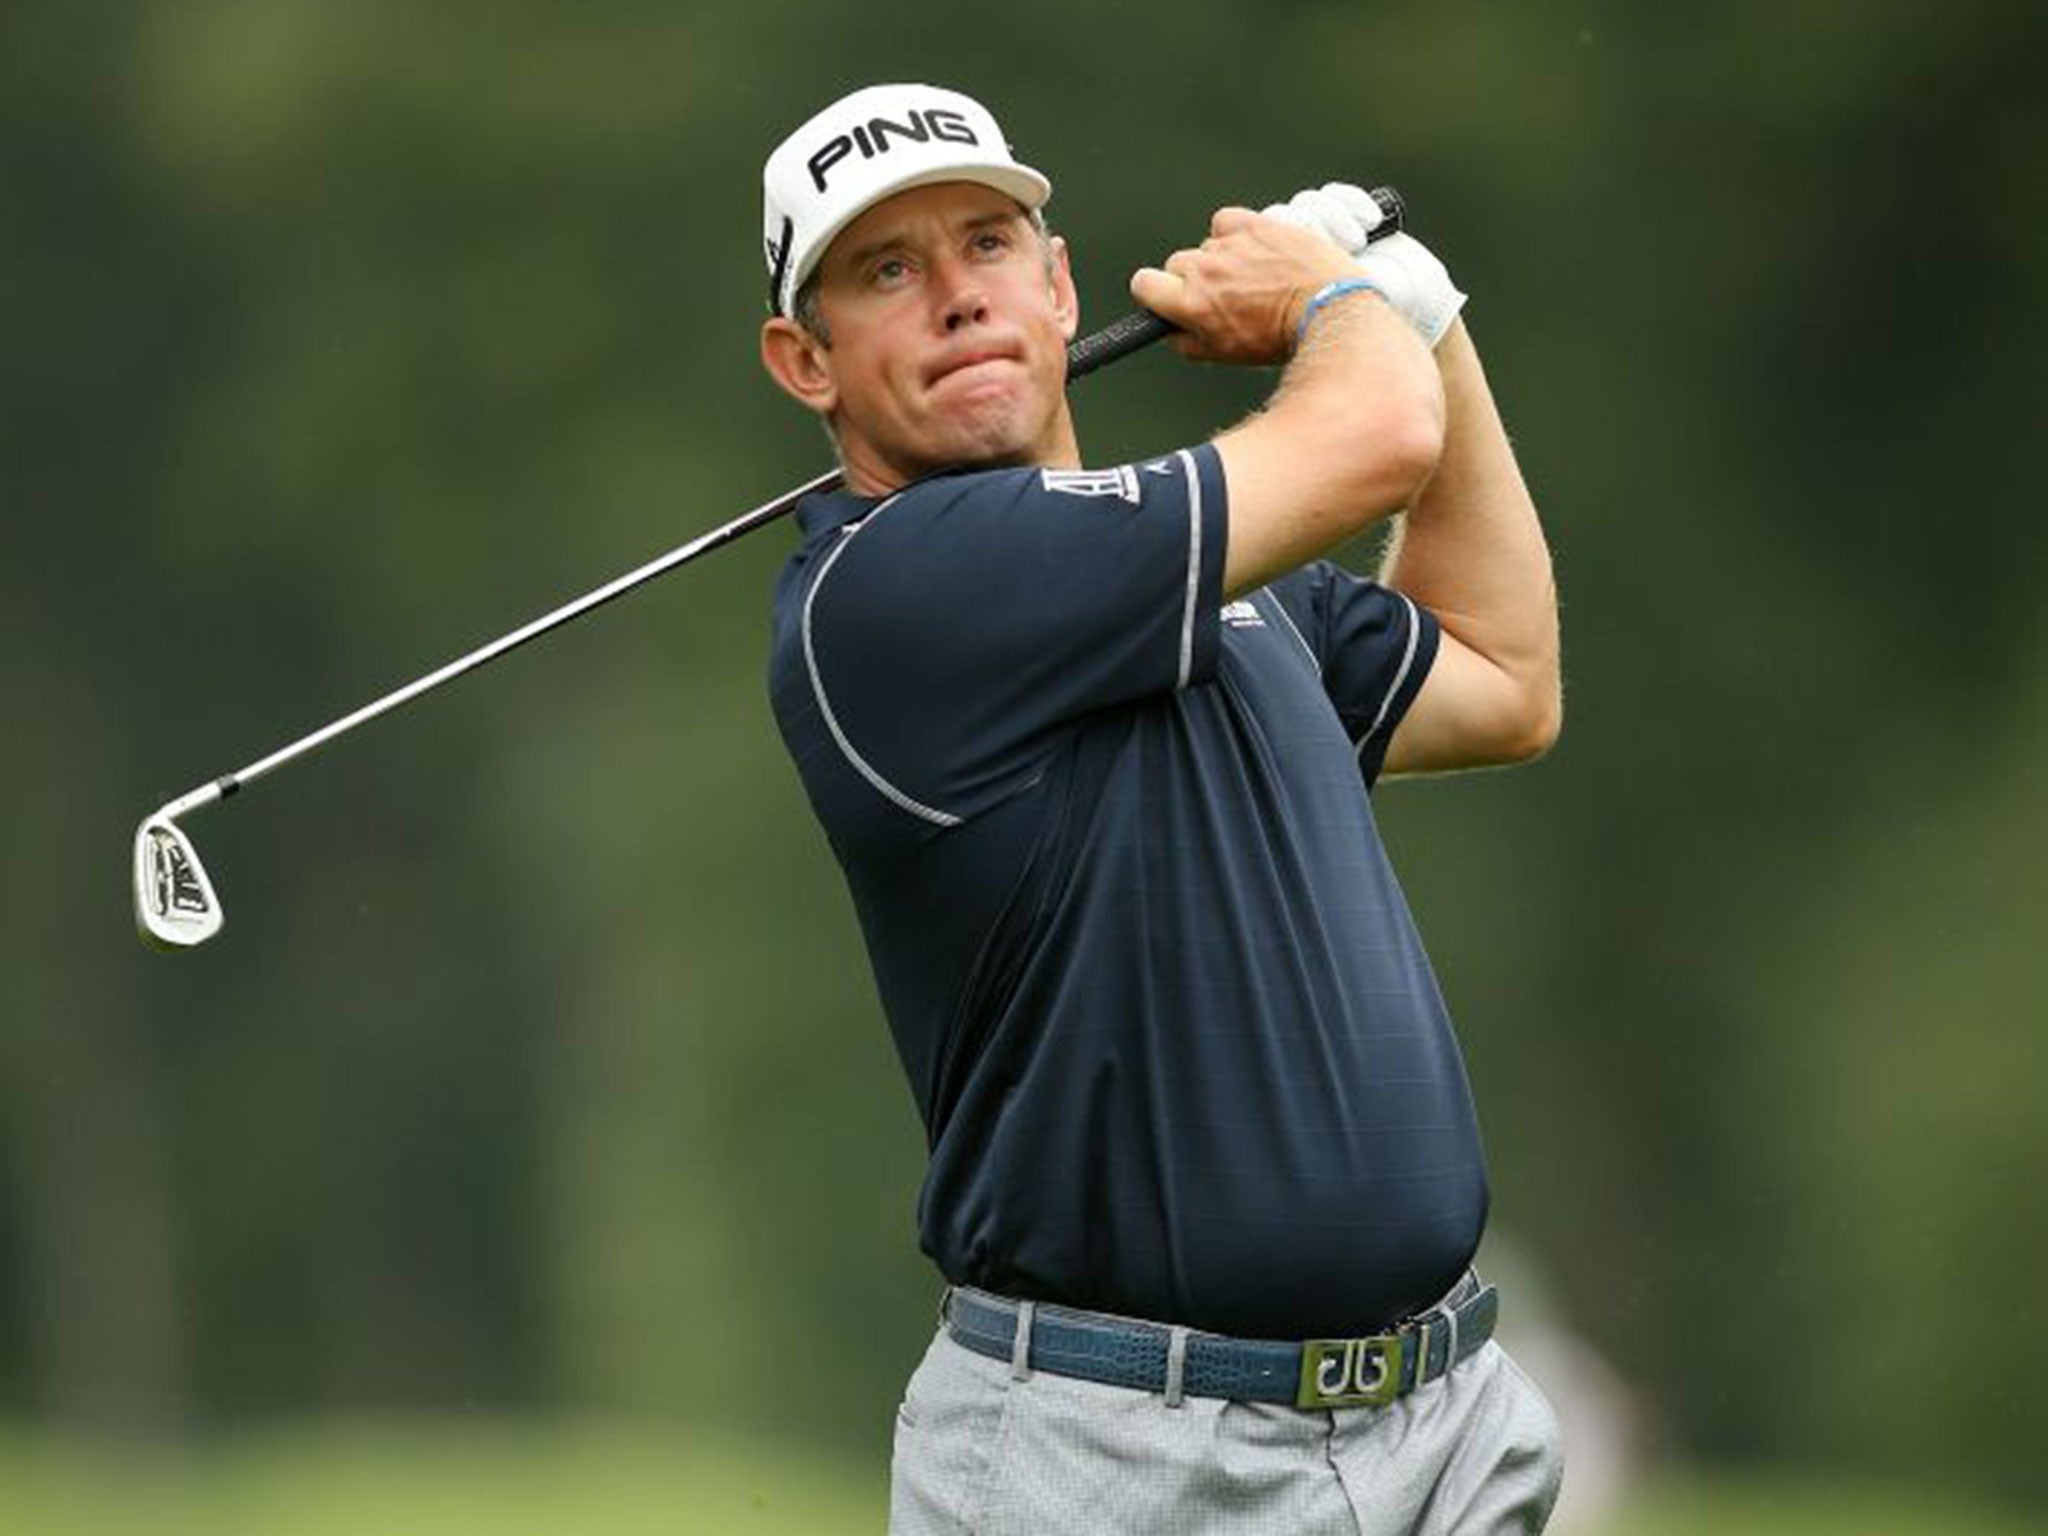 Lee Westwood Not his best year but turns up at big events. Shown form this past month with top 15 finishes at Bridgestone and PGA Championship.